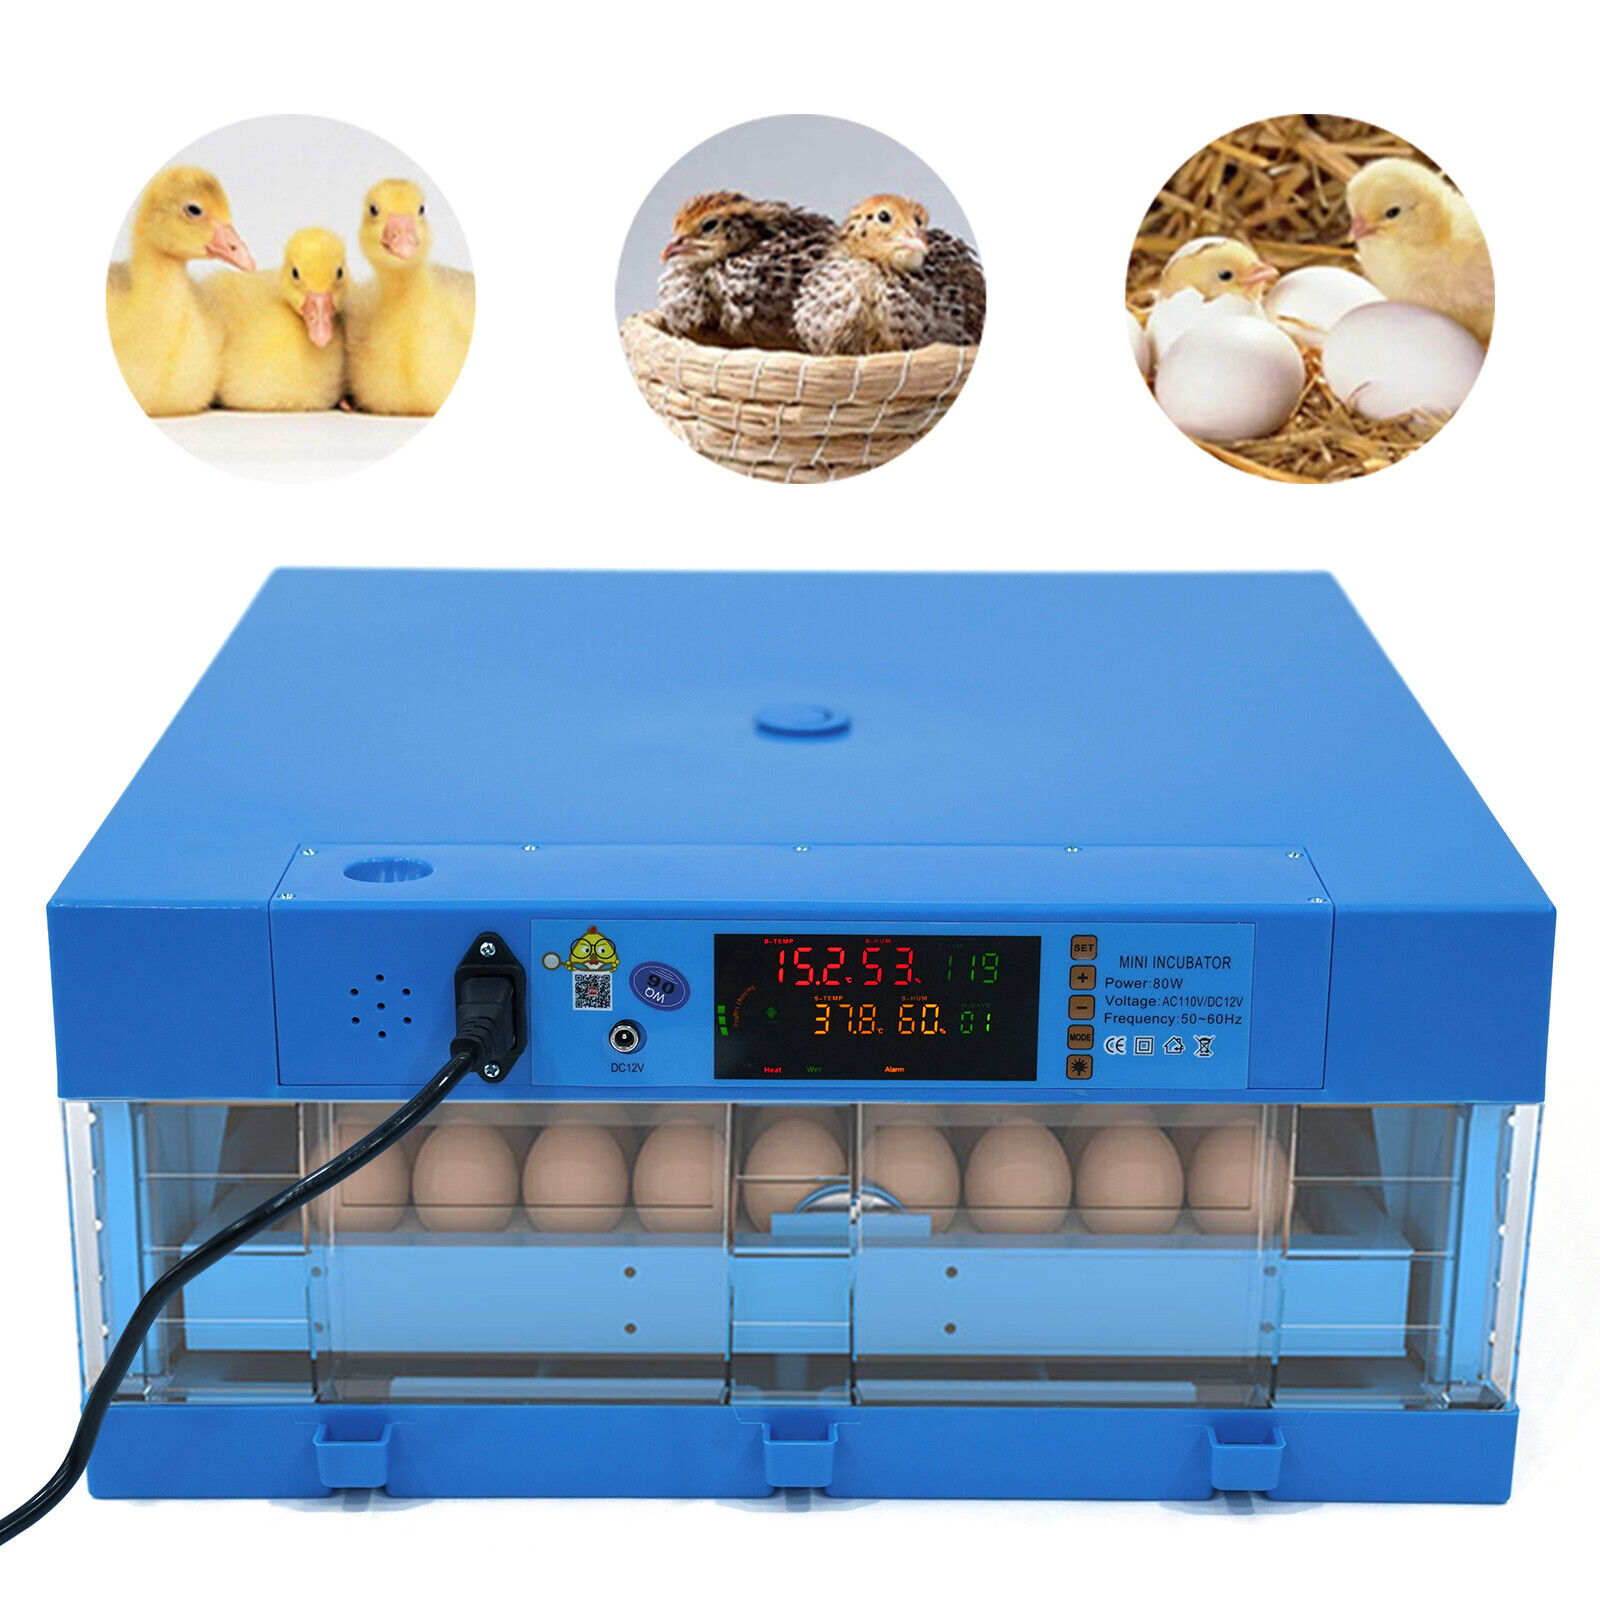 64 Eggs Digital Incubator with Fully Automatic Egg Turning Humidity Chicken Duck TBvechi Does not apply